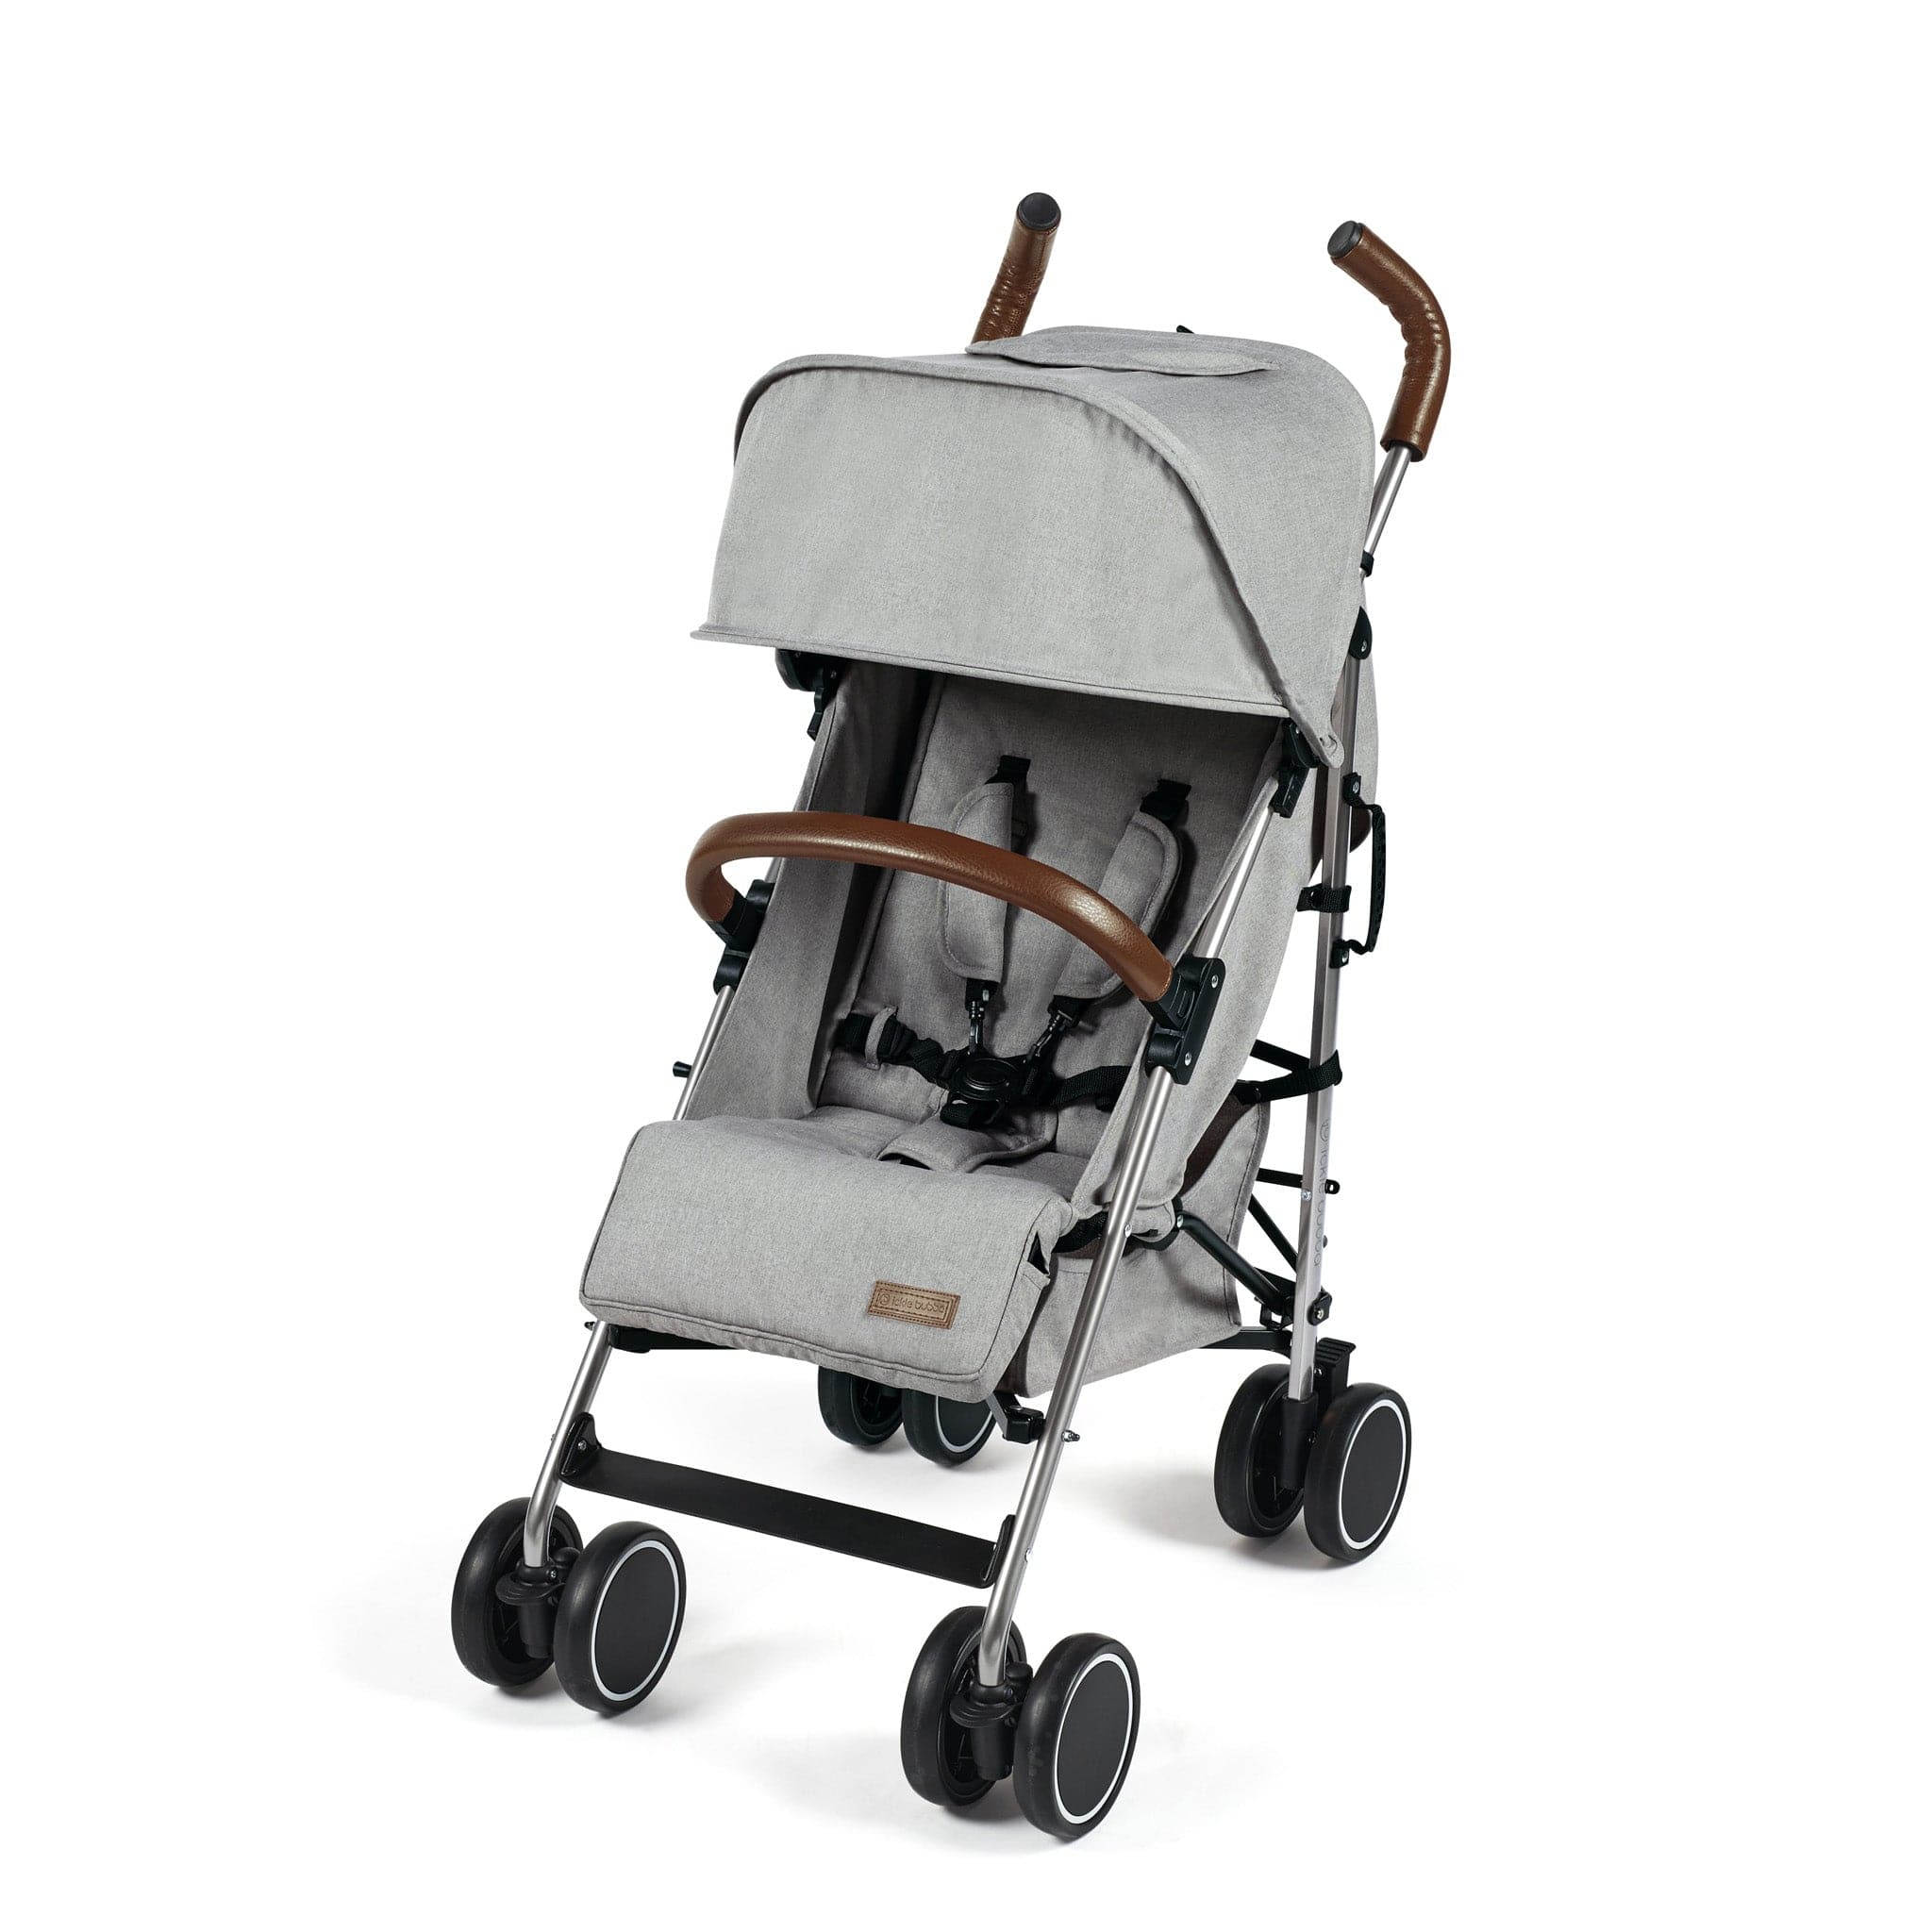 Ickle Bubba baby pushchairs Ickle Bubba Discovery Prime Pushchair Silver/Grey 15-002-300-056